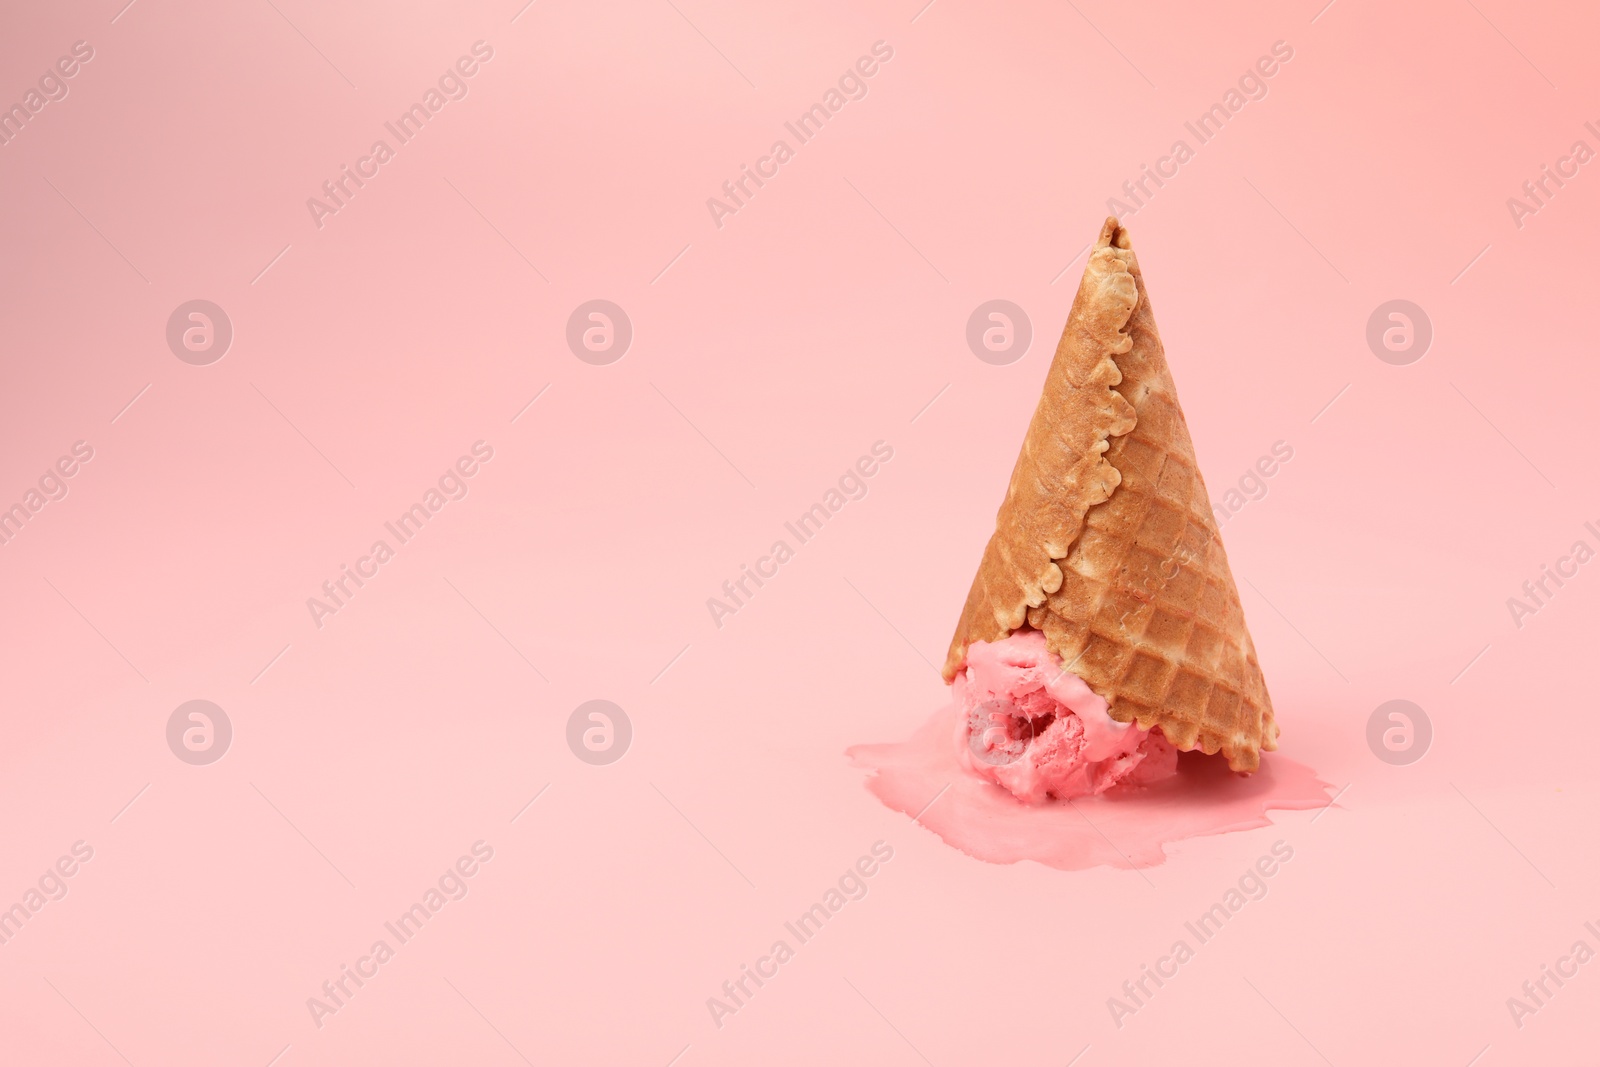 Photo of Melted ice cream in wafer cone on pink background. Space for text